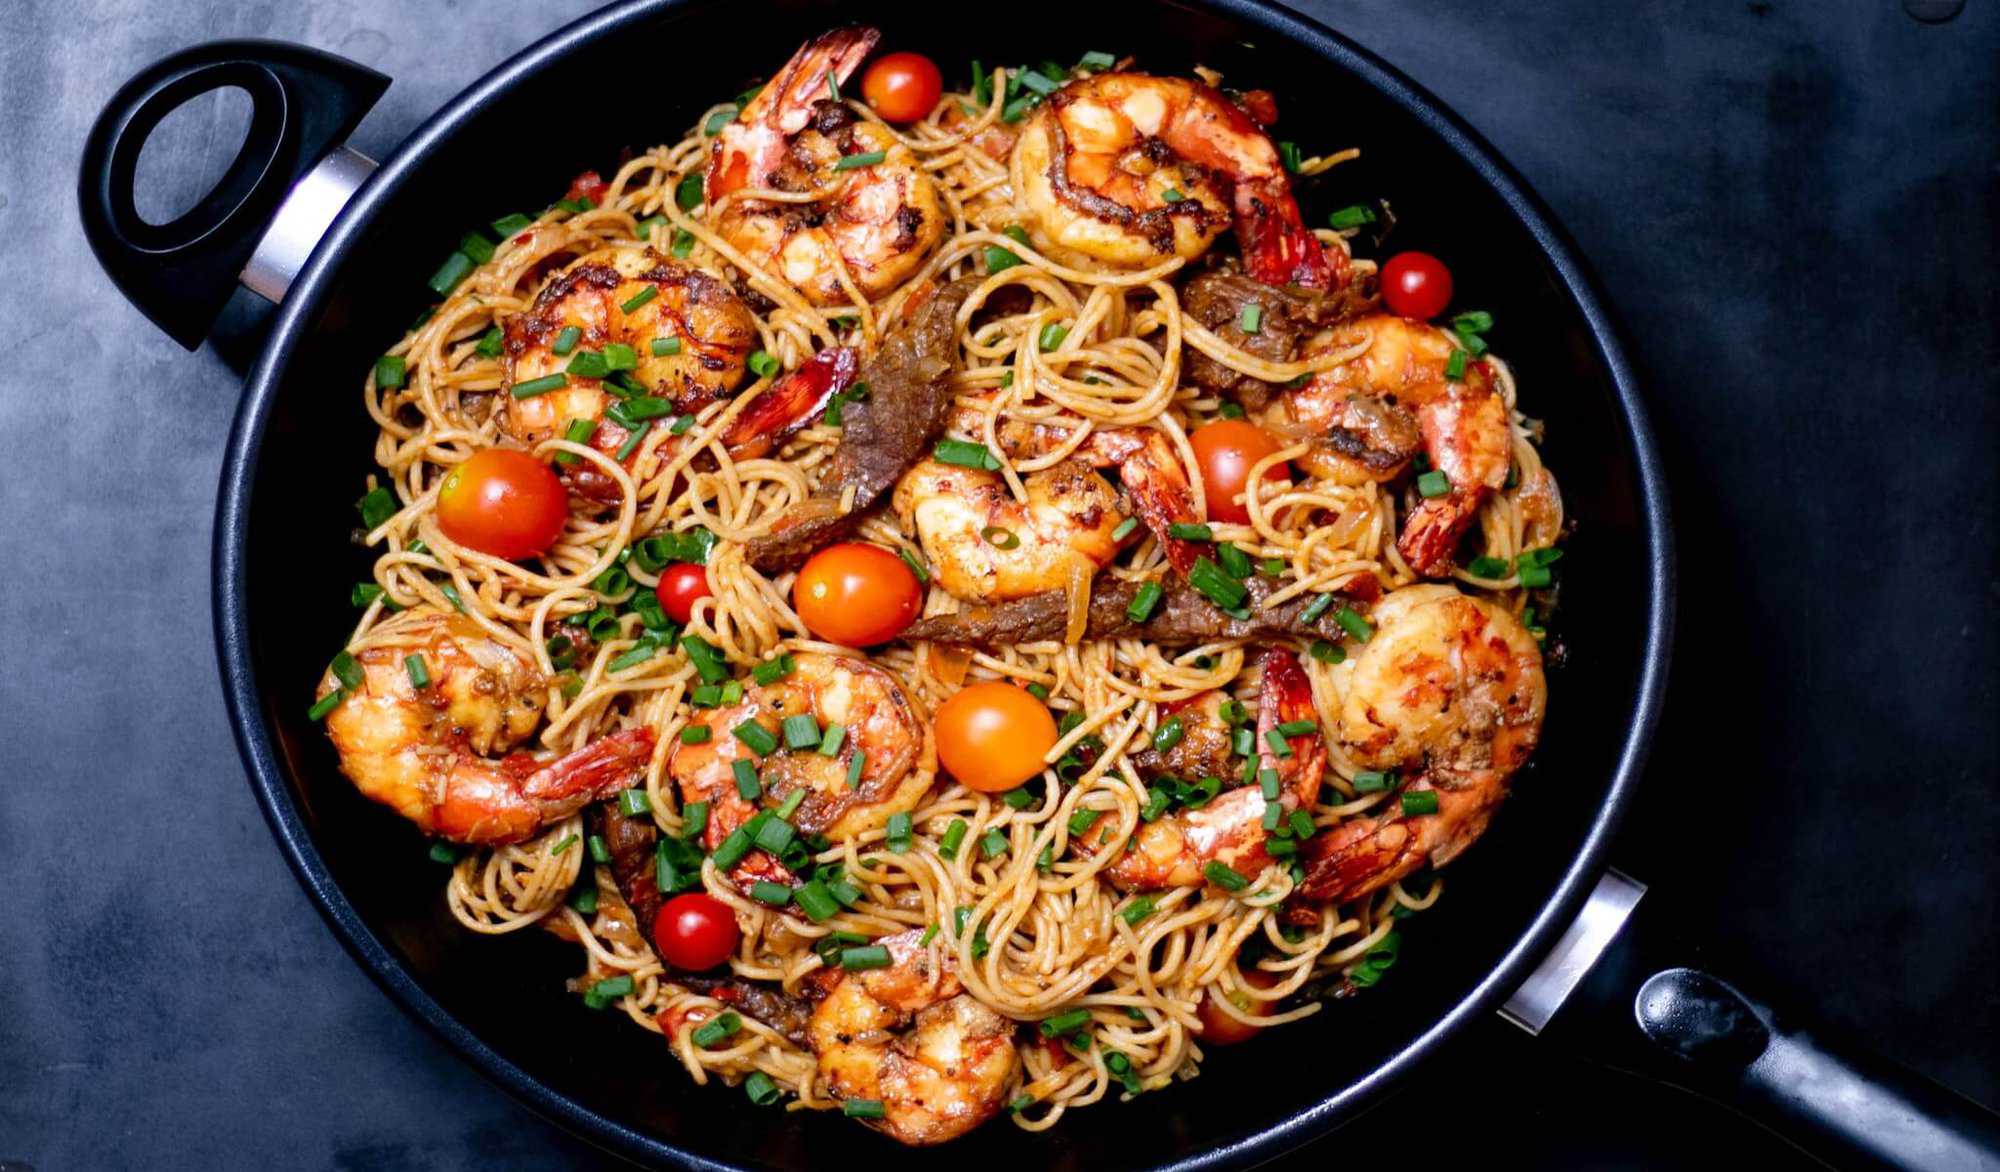 A pan full of seafood pasta with cherry tomatoes, grilled prawns, and chopped herbs.